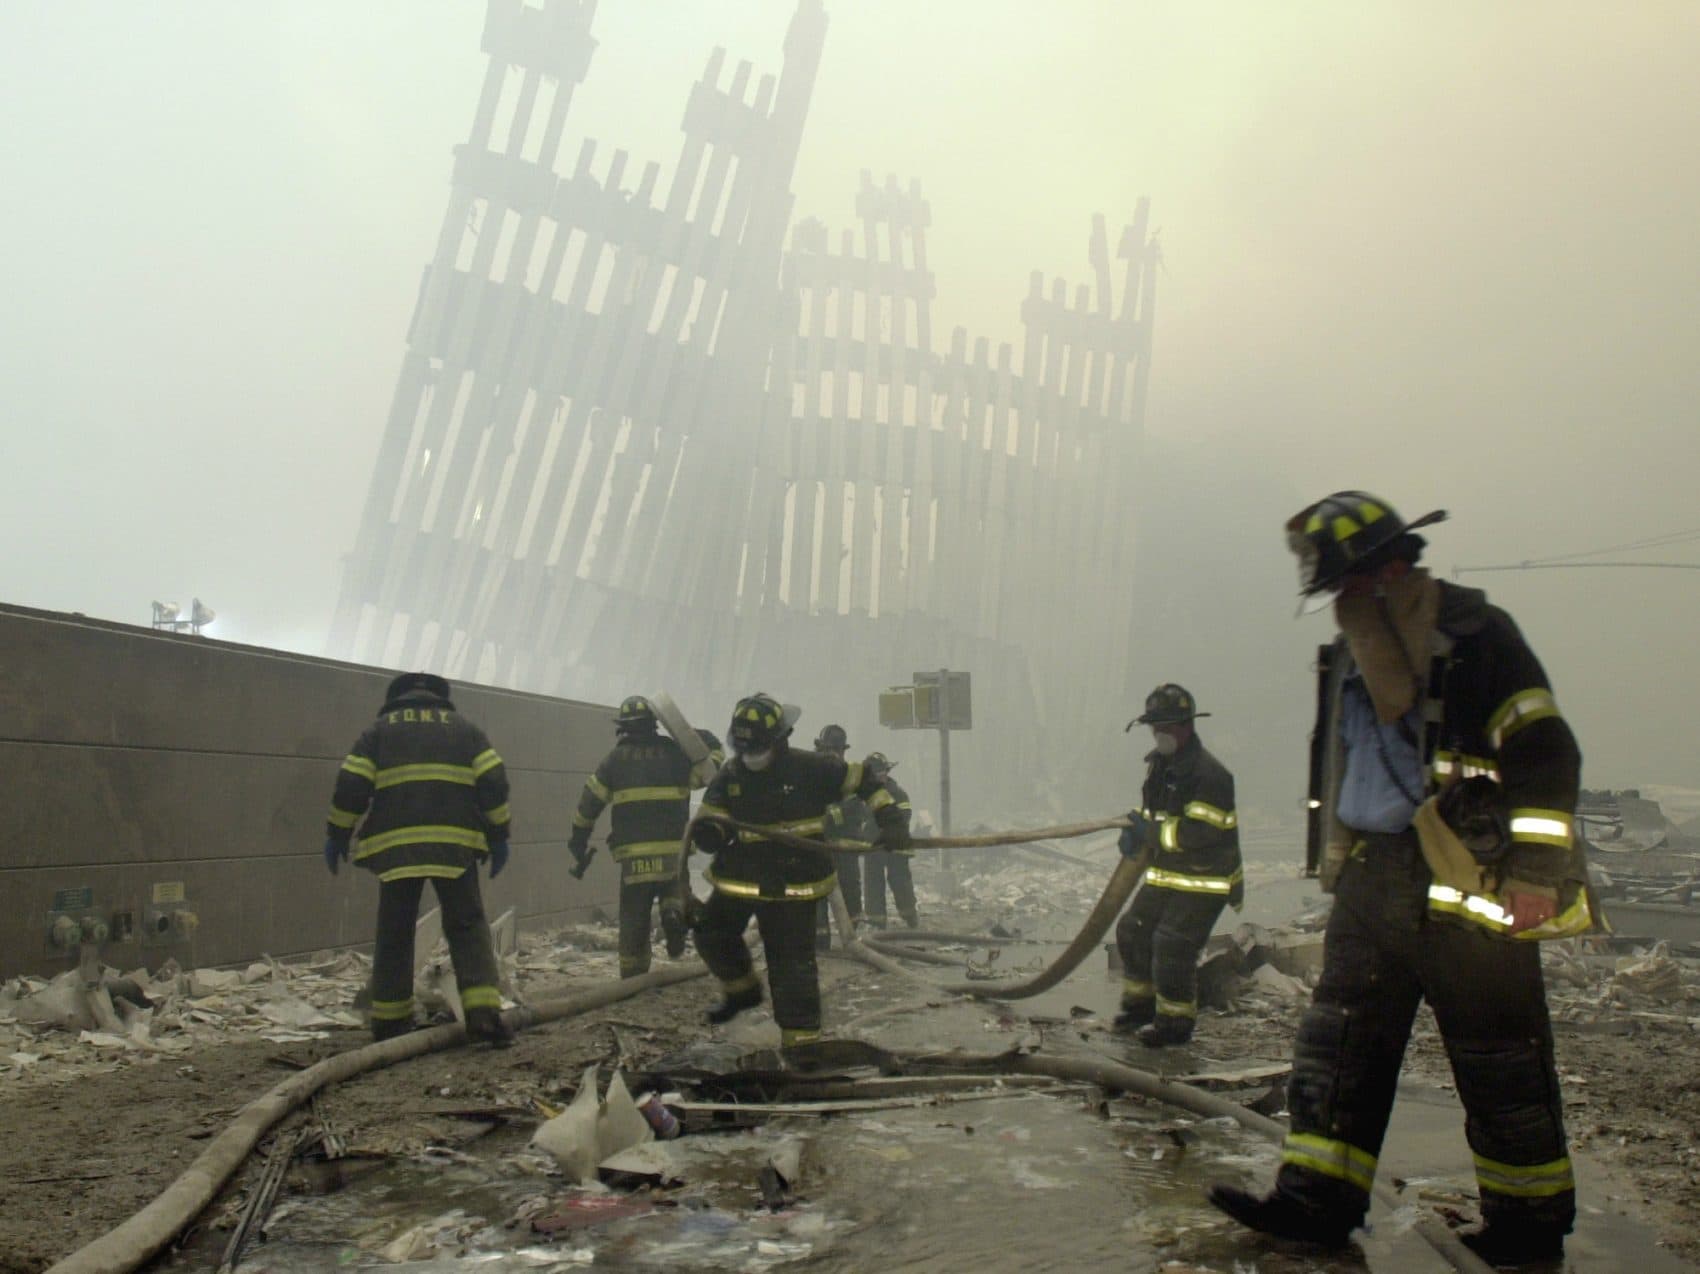 After 9/11, two years and 23 suicide attacks in Israel left author Alison Murphy inured to the frequency of terror strikes. Now she wonders, can she get unused to such them? Pictured: Firefighters work beneath the destroyed mullions, the vertical struts which once faced the soaring outer walls of the World Trade Center towers, after a terrorist attack on the twin towers in New York on September 11, 2001. (Mark Lennihan/AP)